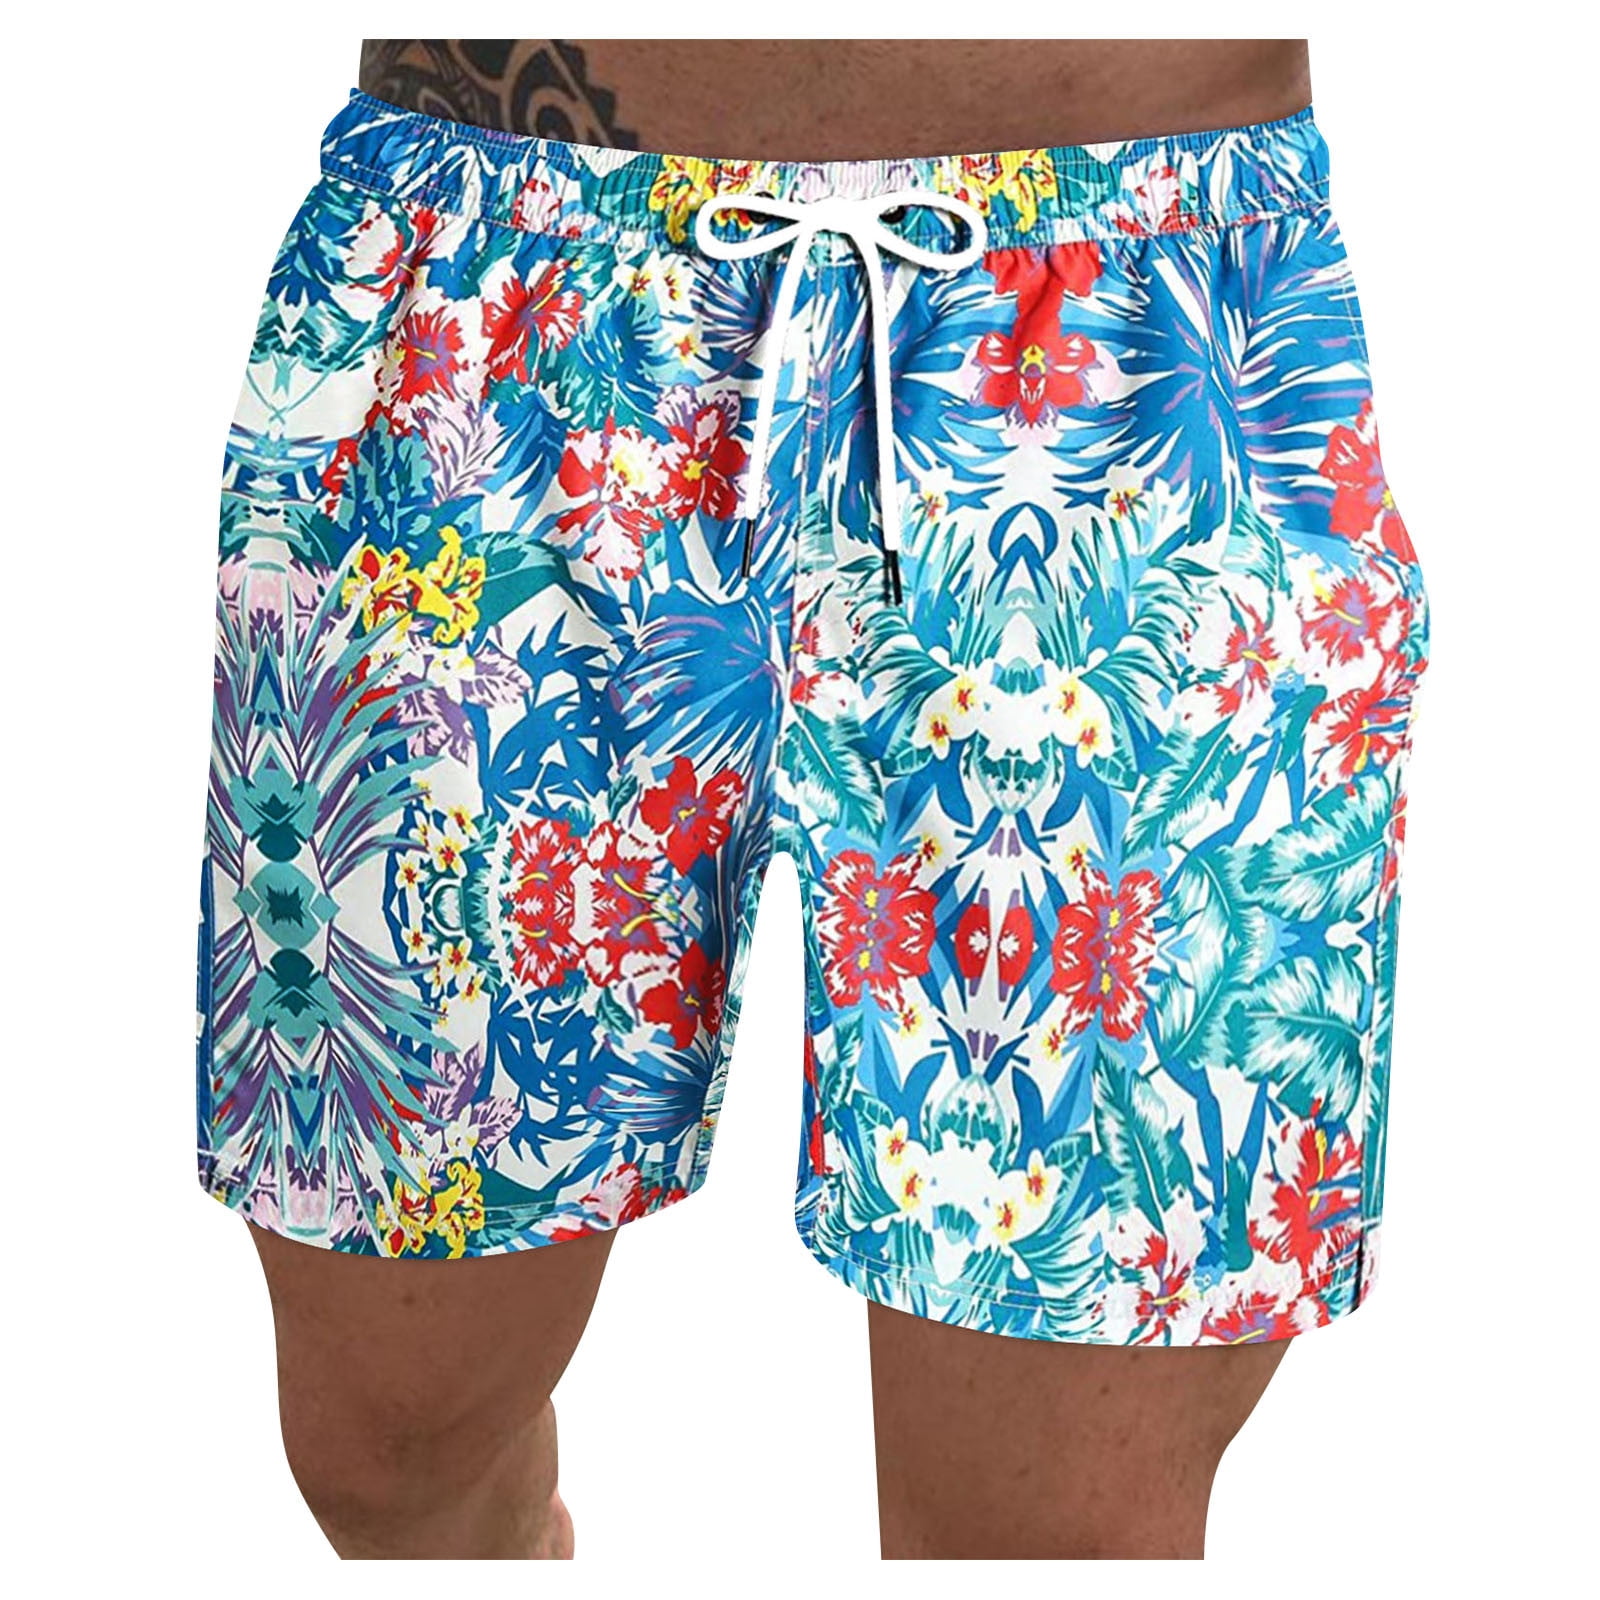 Mens Beach Shorts Mermaid Summer Casual Quick Dry Short Pants Stretch Swimming Trunks with Pocket